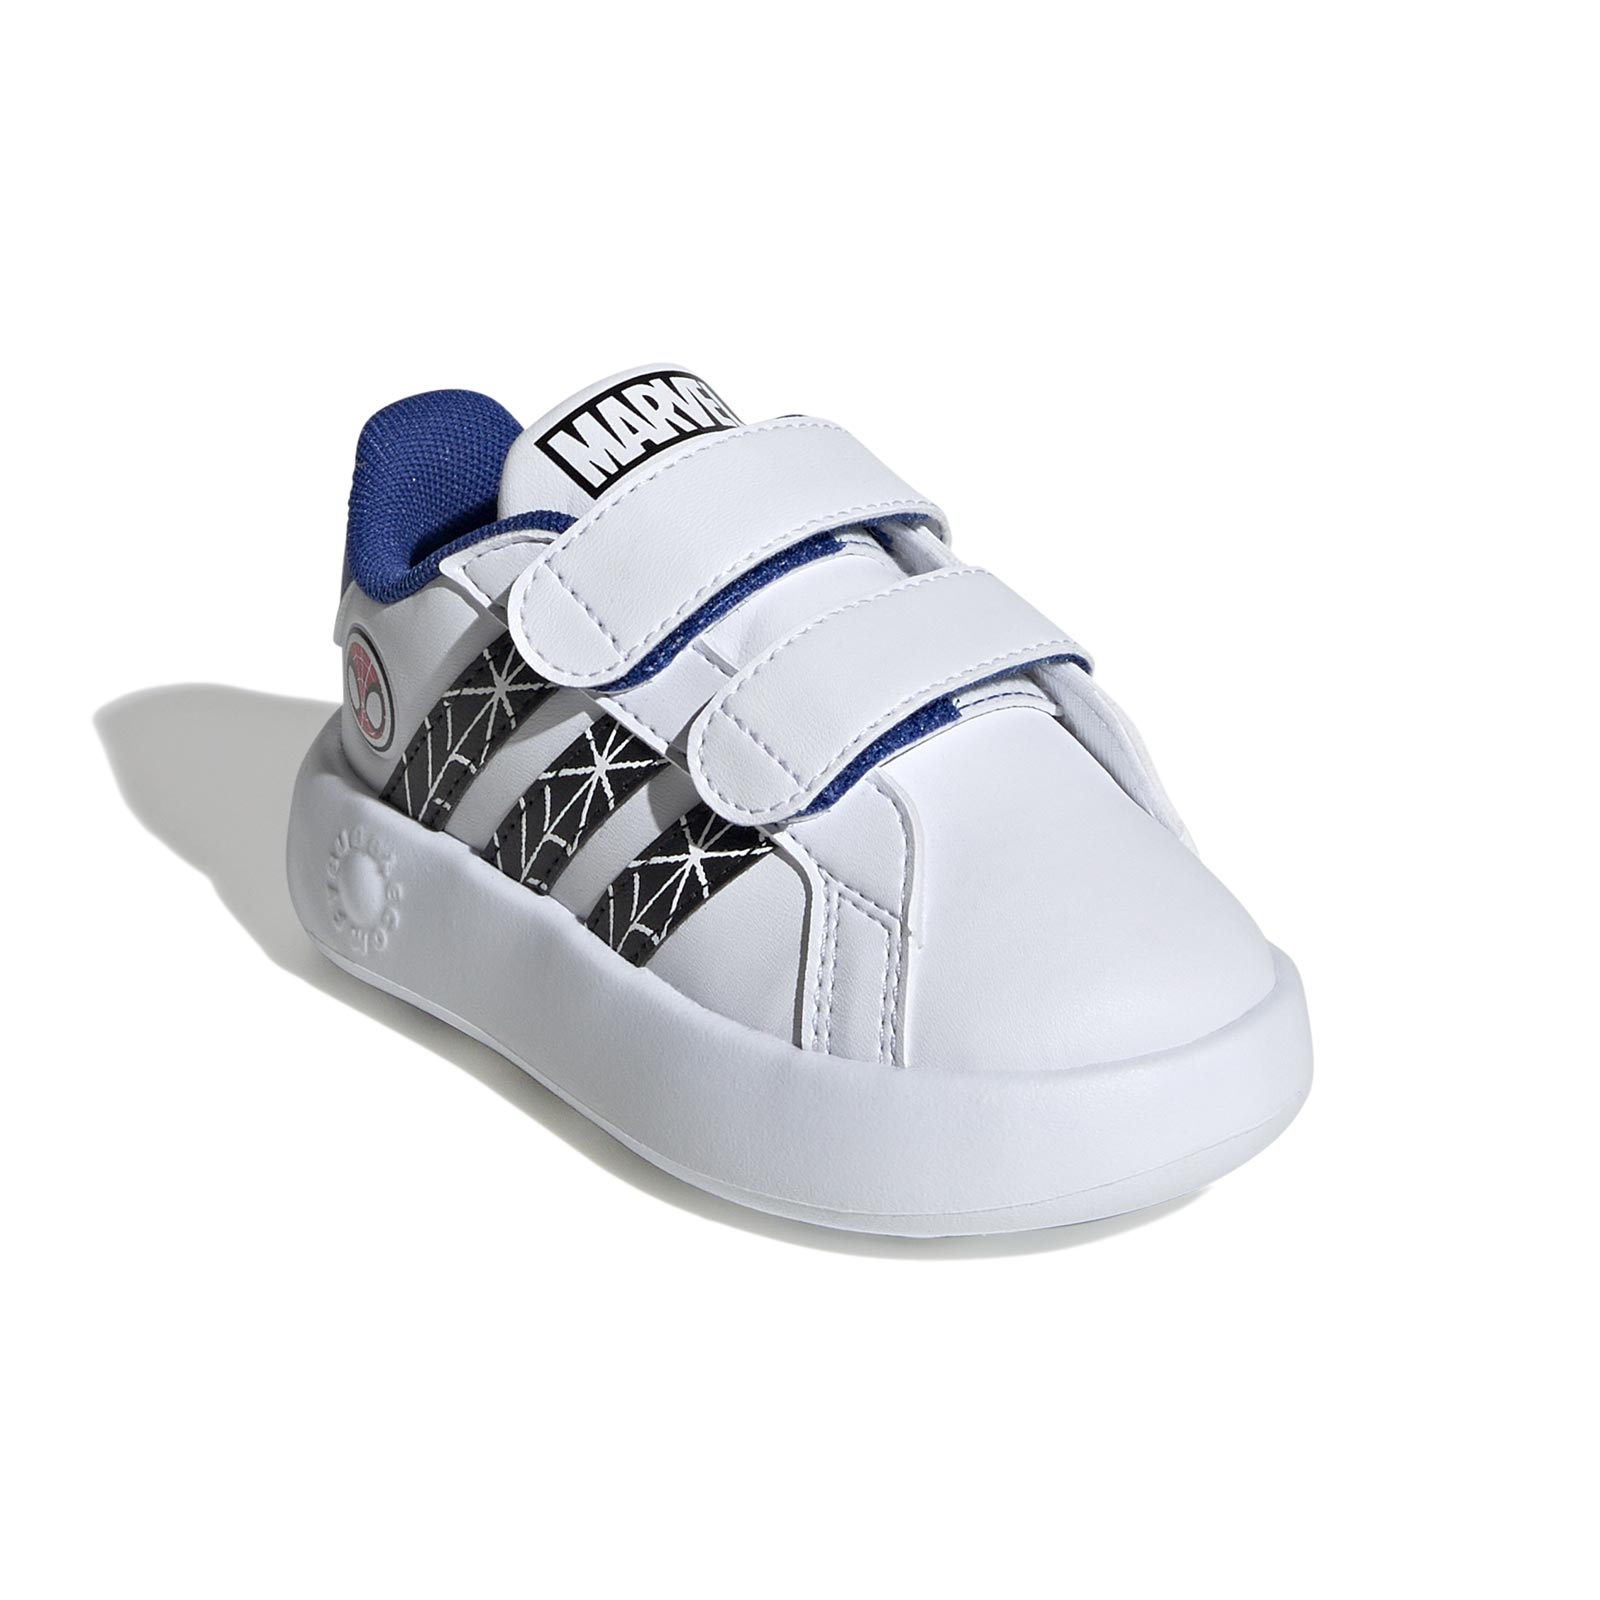 adidas Grand Court SpiderMan Infant Boys Shoes